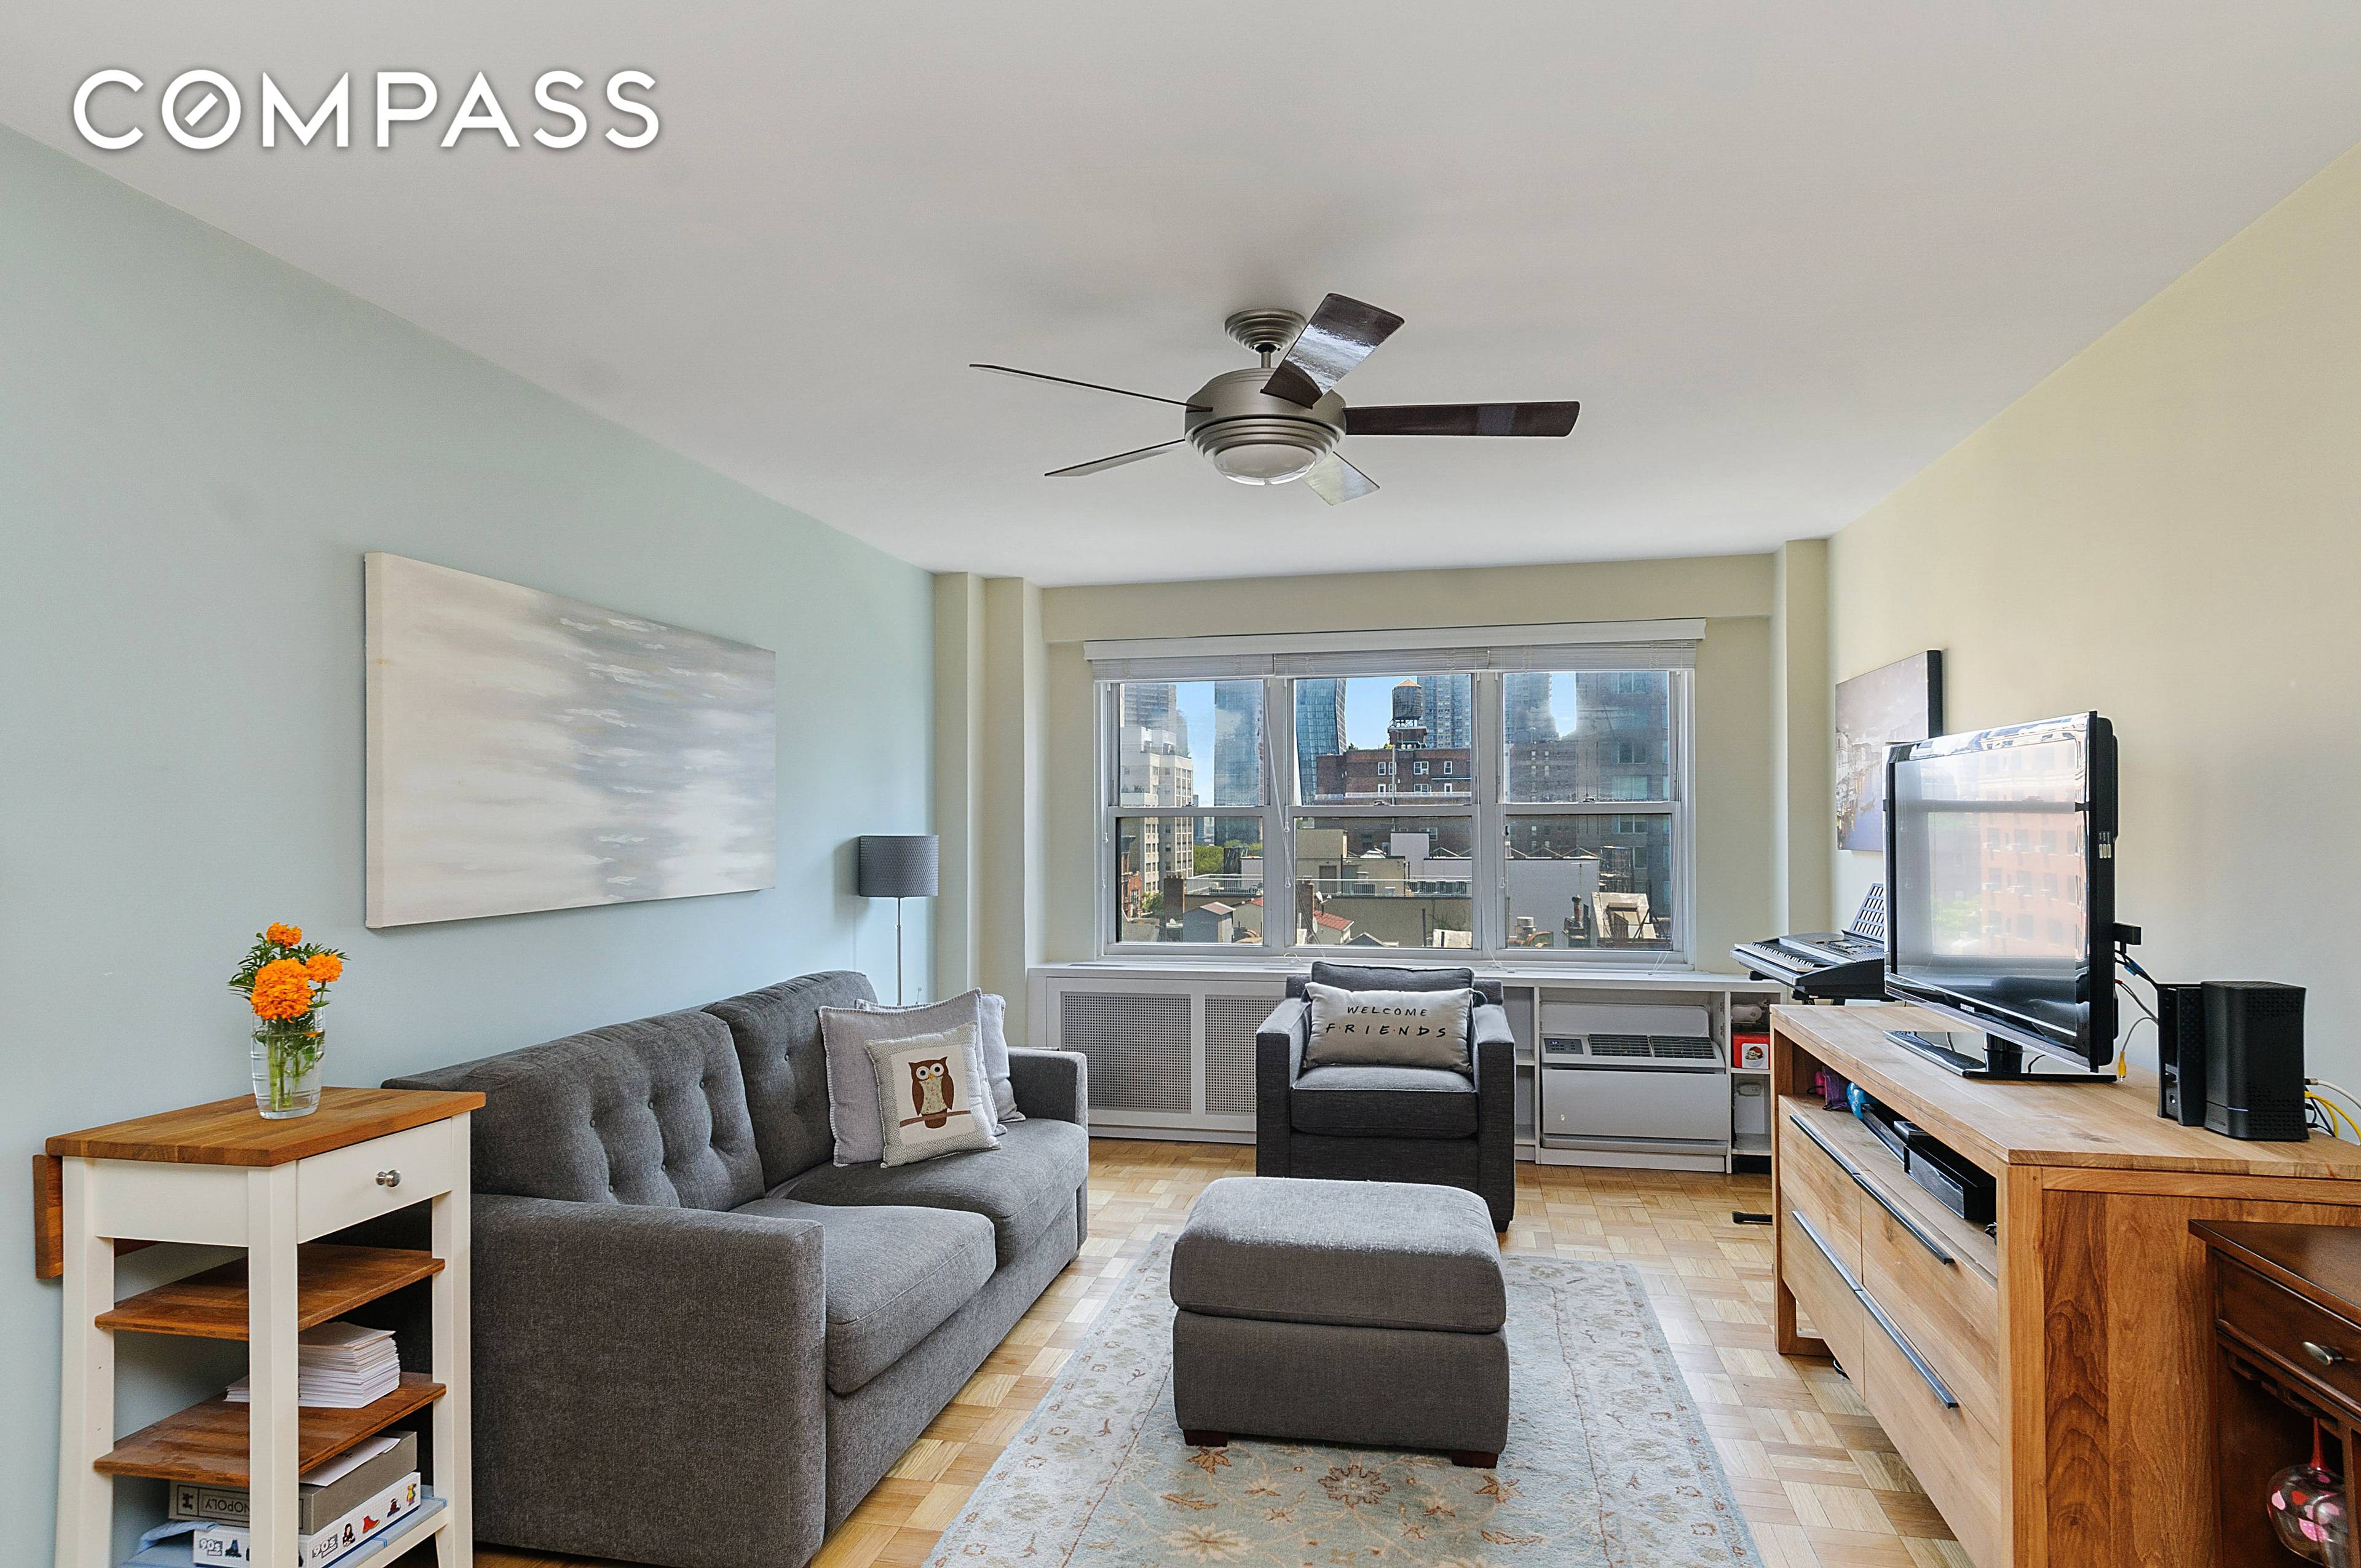 Space, light and open city vista are some of the many impressive features of this expansive 1 bedroom home, easily convertible into a 2 bedroom unit.